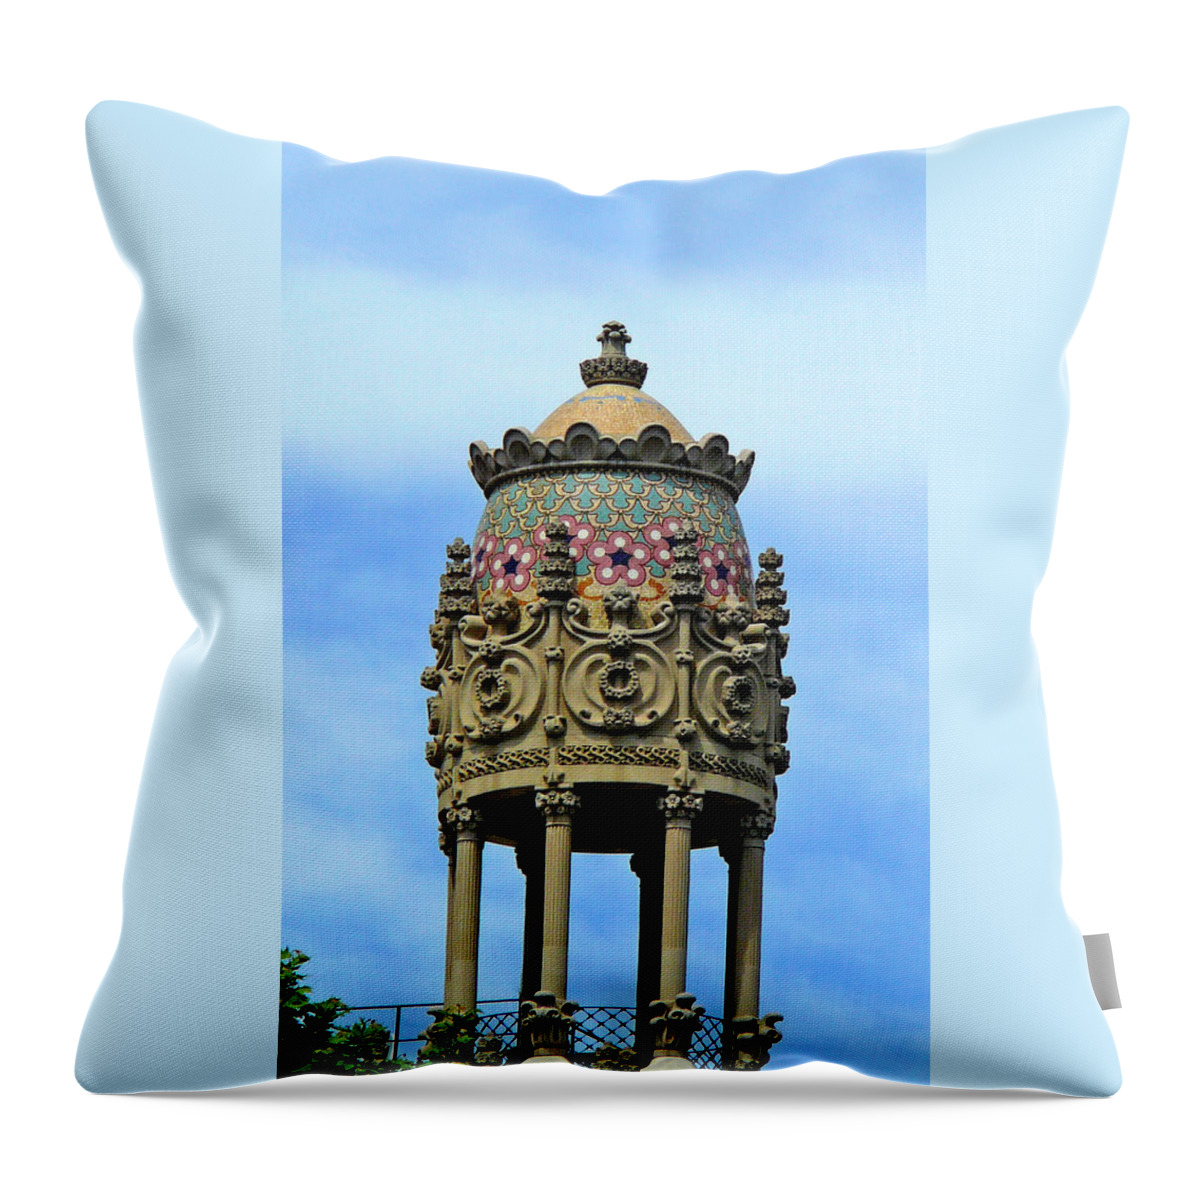 Photography Throw Pillow featuring the photograph Artistic Roof by Francesca Mackenney